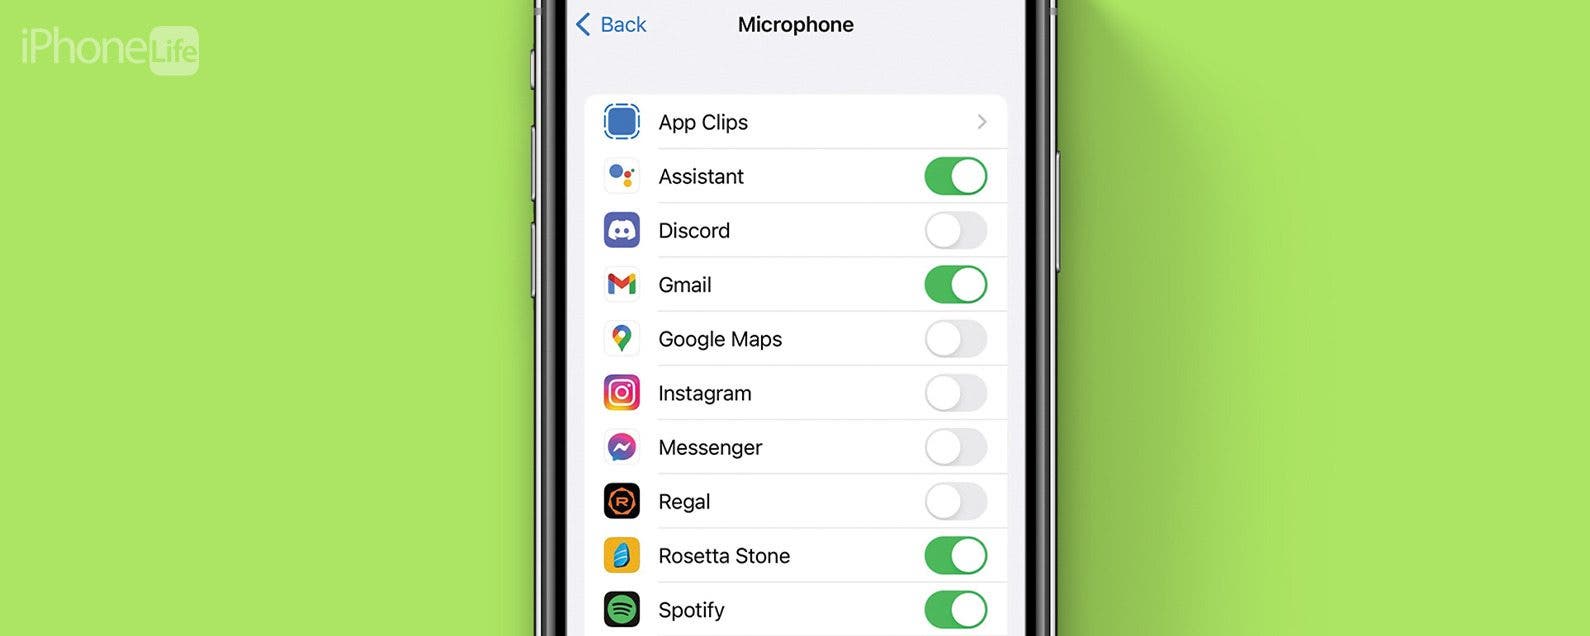 iPhone Microphone Not Working? Try These 6 Quick Fixes!